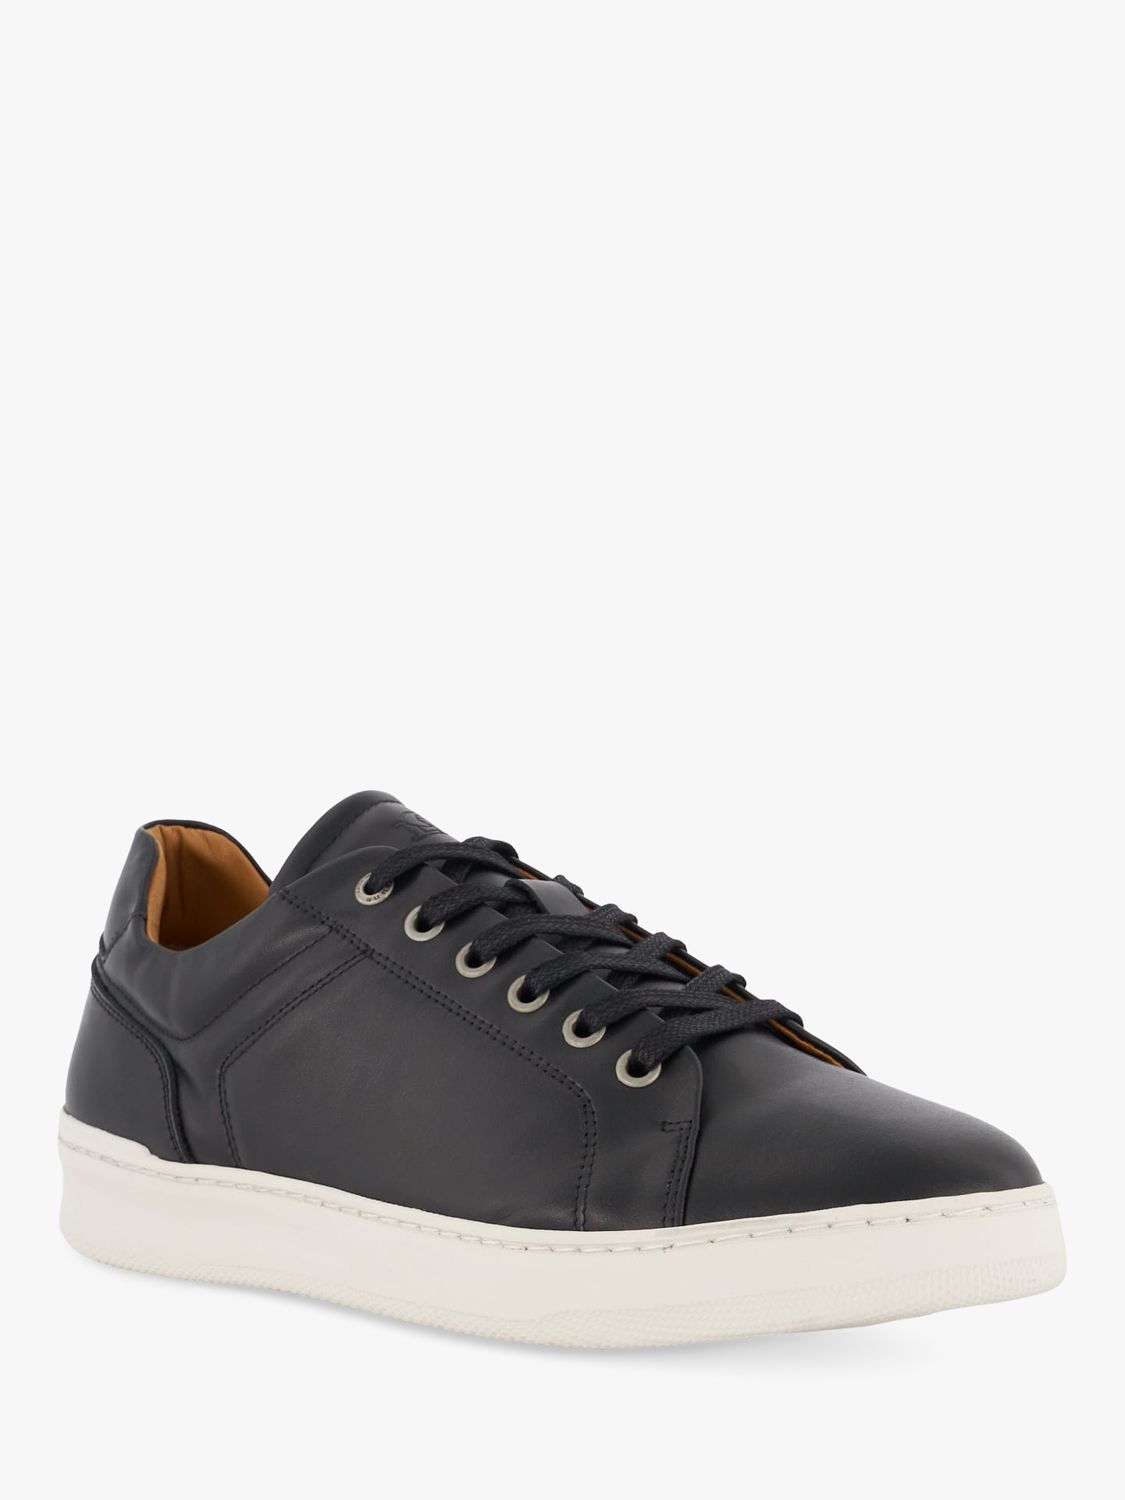 Dune Toledo Low Top Leather Trainers, Black at John Lewis & Partners